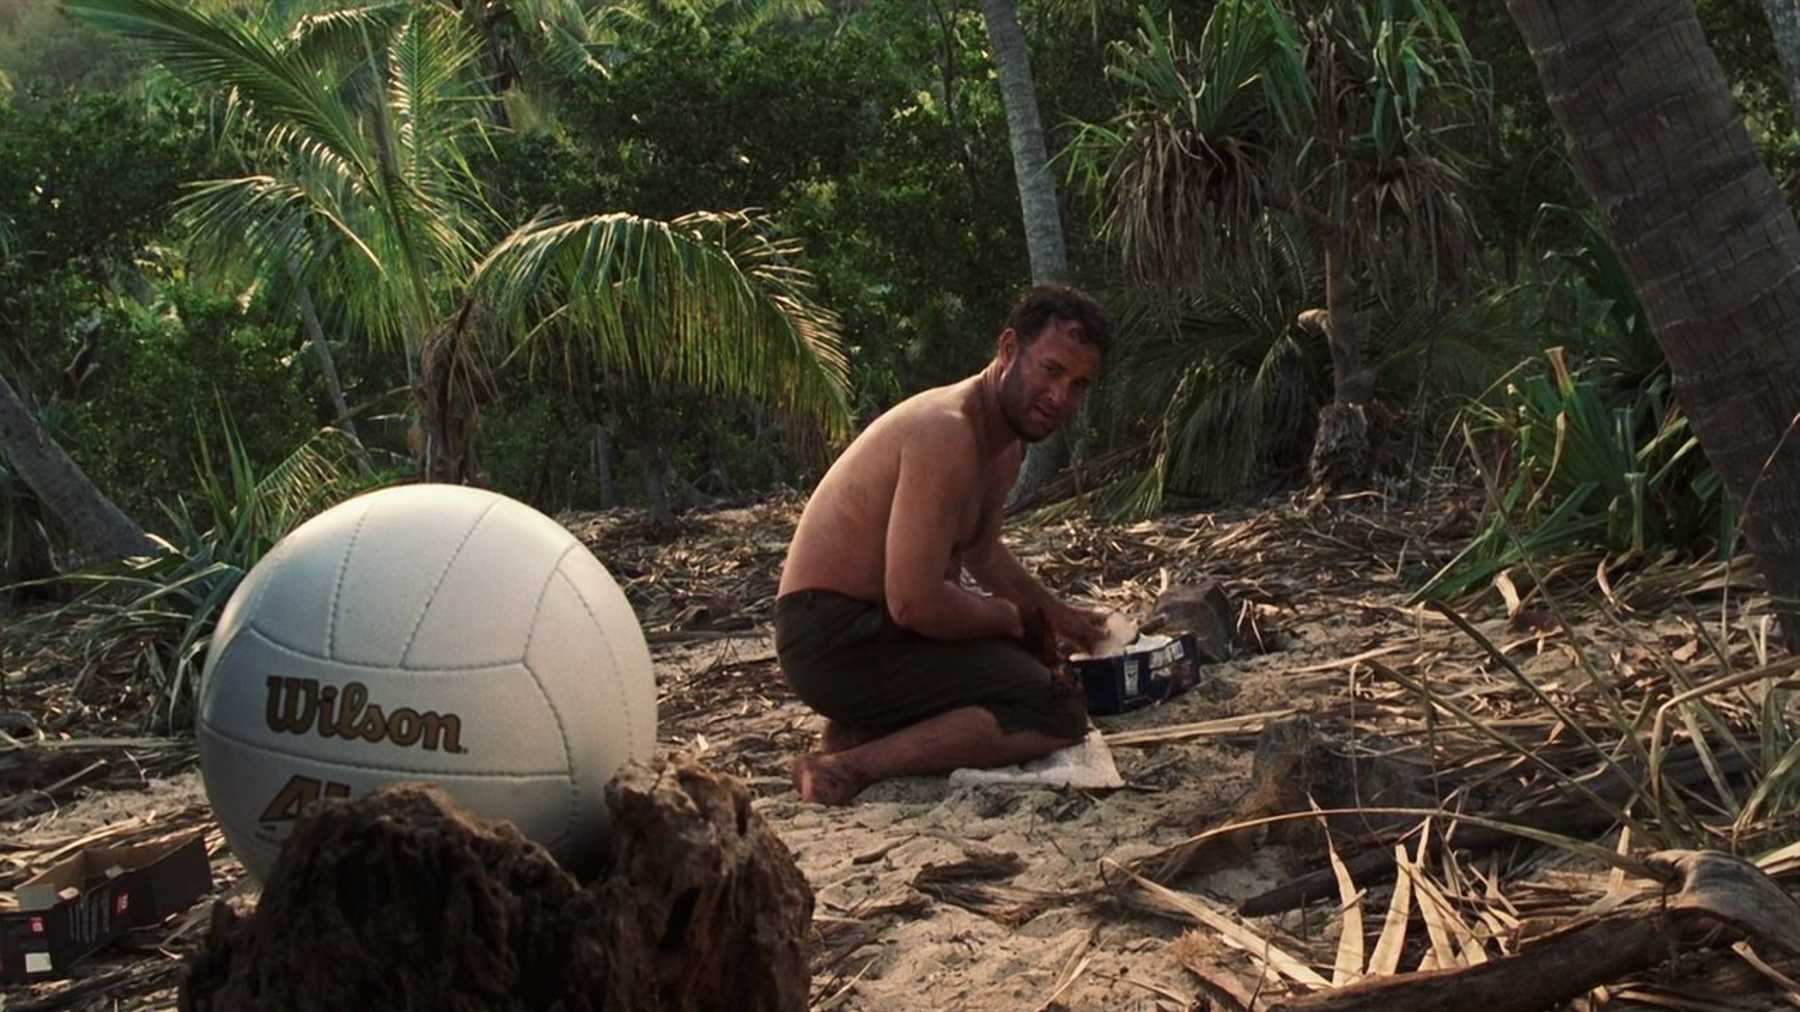 Tom Hanks: In 'Cast Away,' This Emotional Wilson Scene Came Naturally